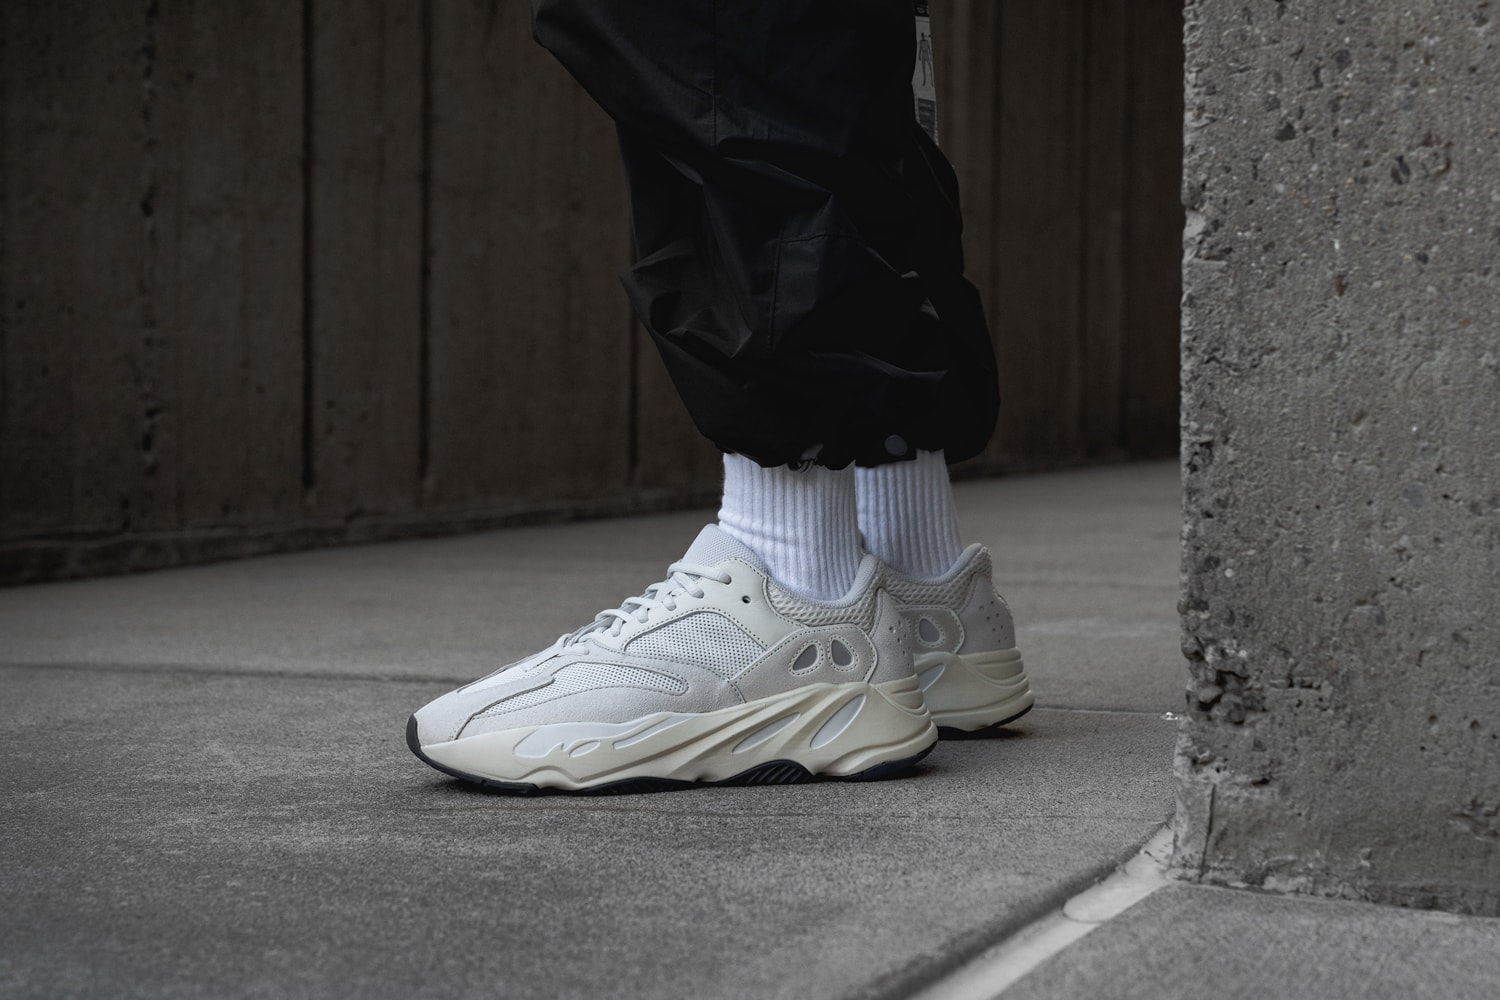 mangfoldighed Instrument Forhandle adidas YEEZY BOOST 700 "Analog" On-Foot Look | Hypebeast